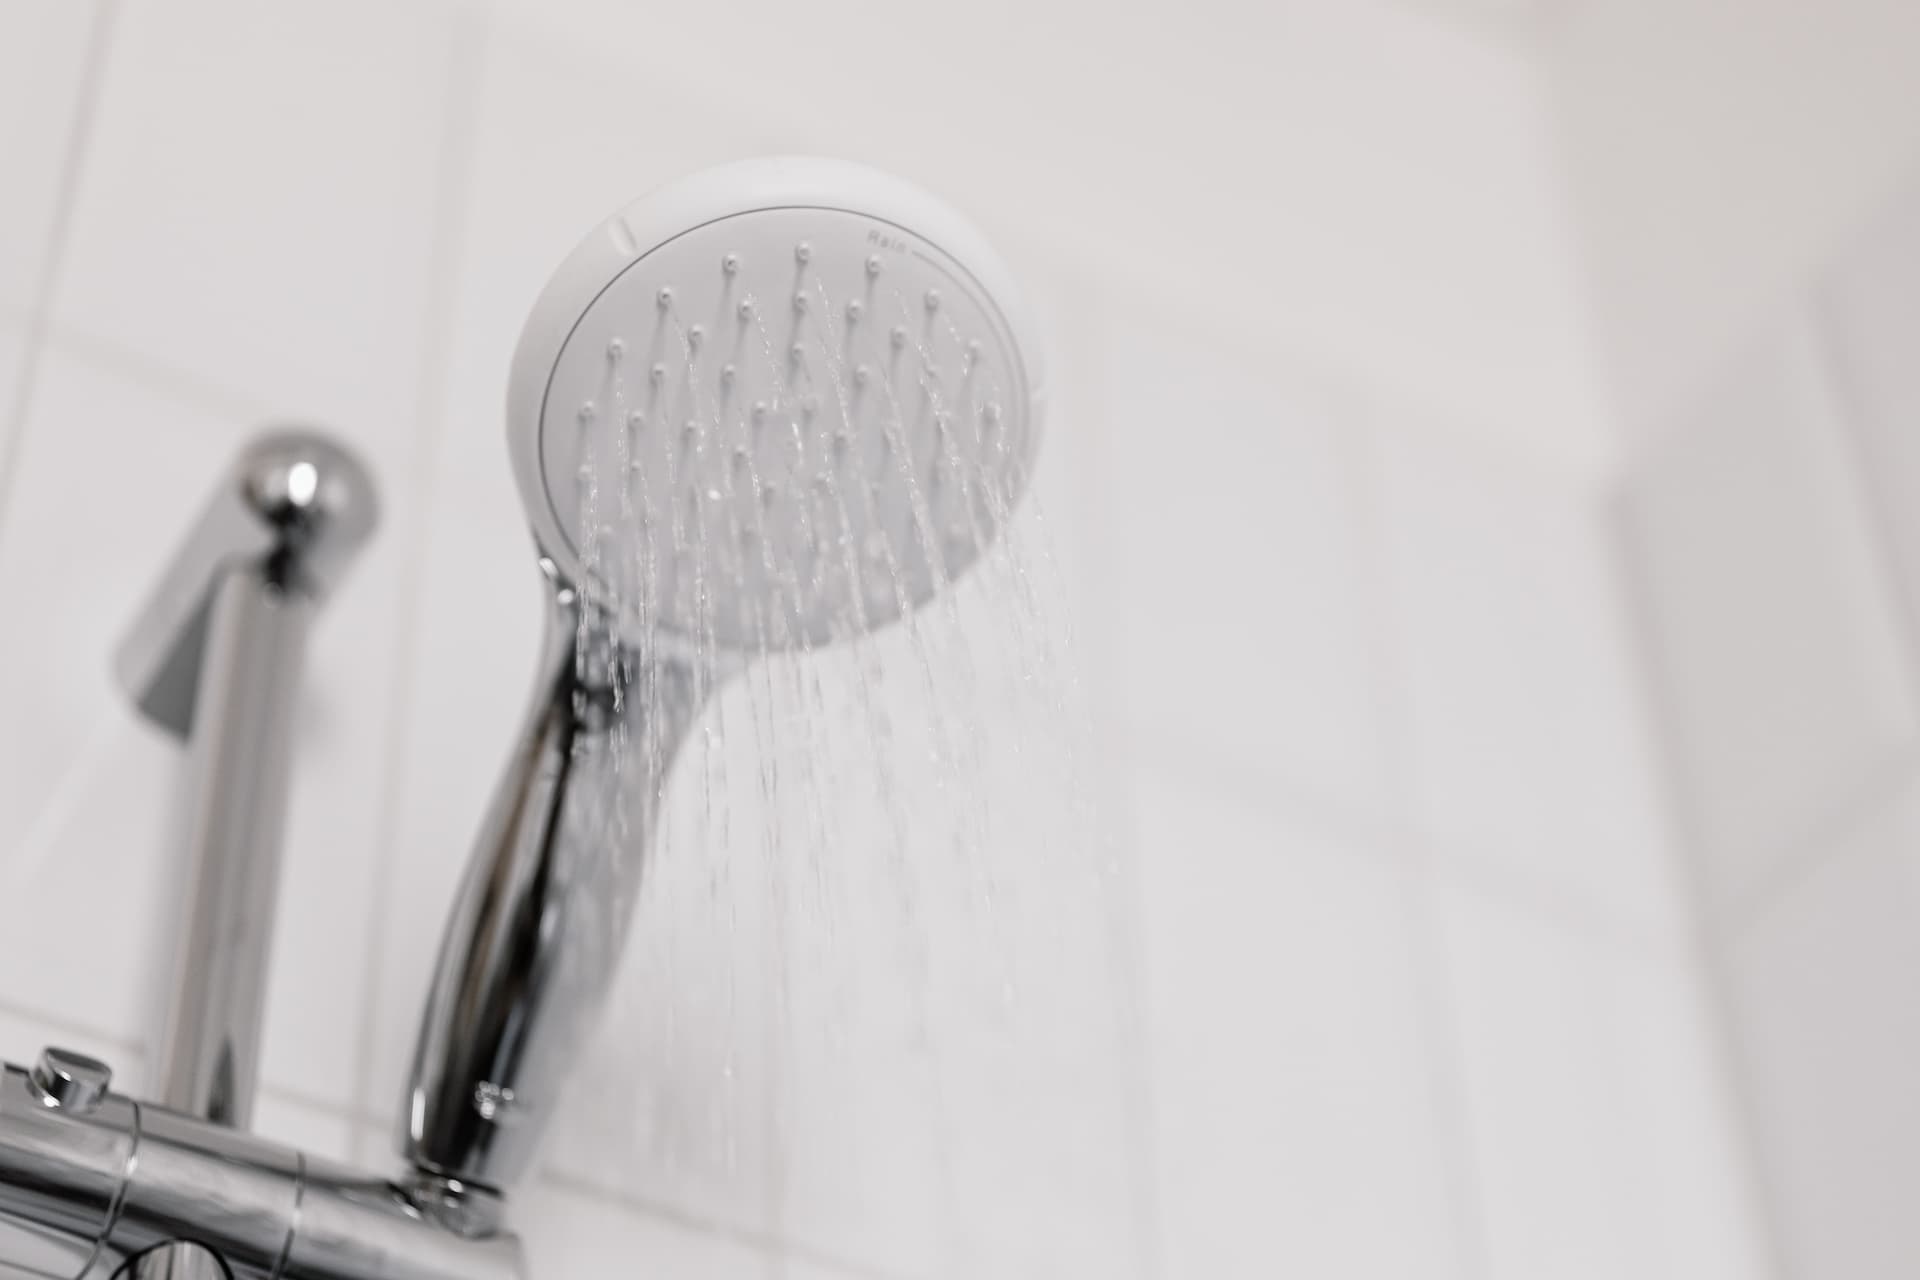 showerhead_what causes low water pressure in the shower?